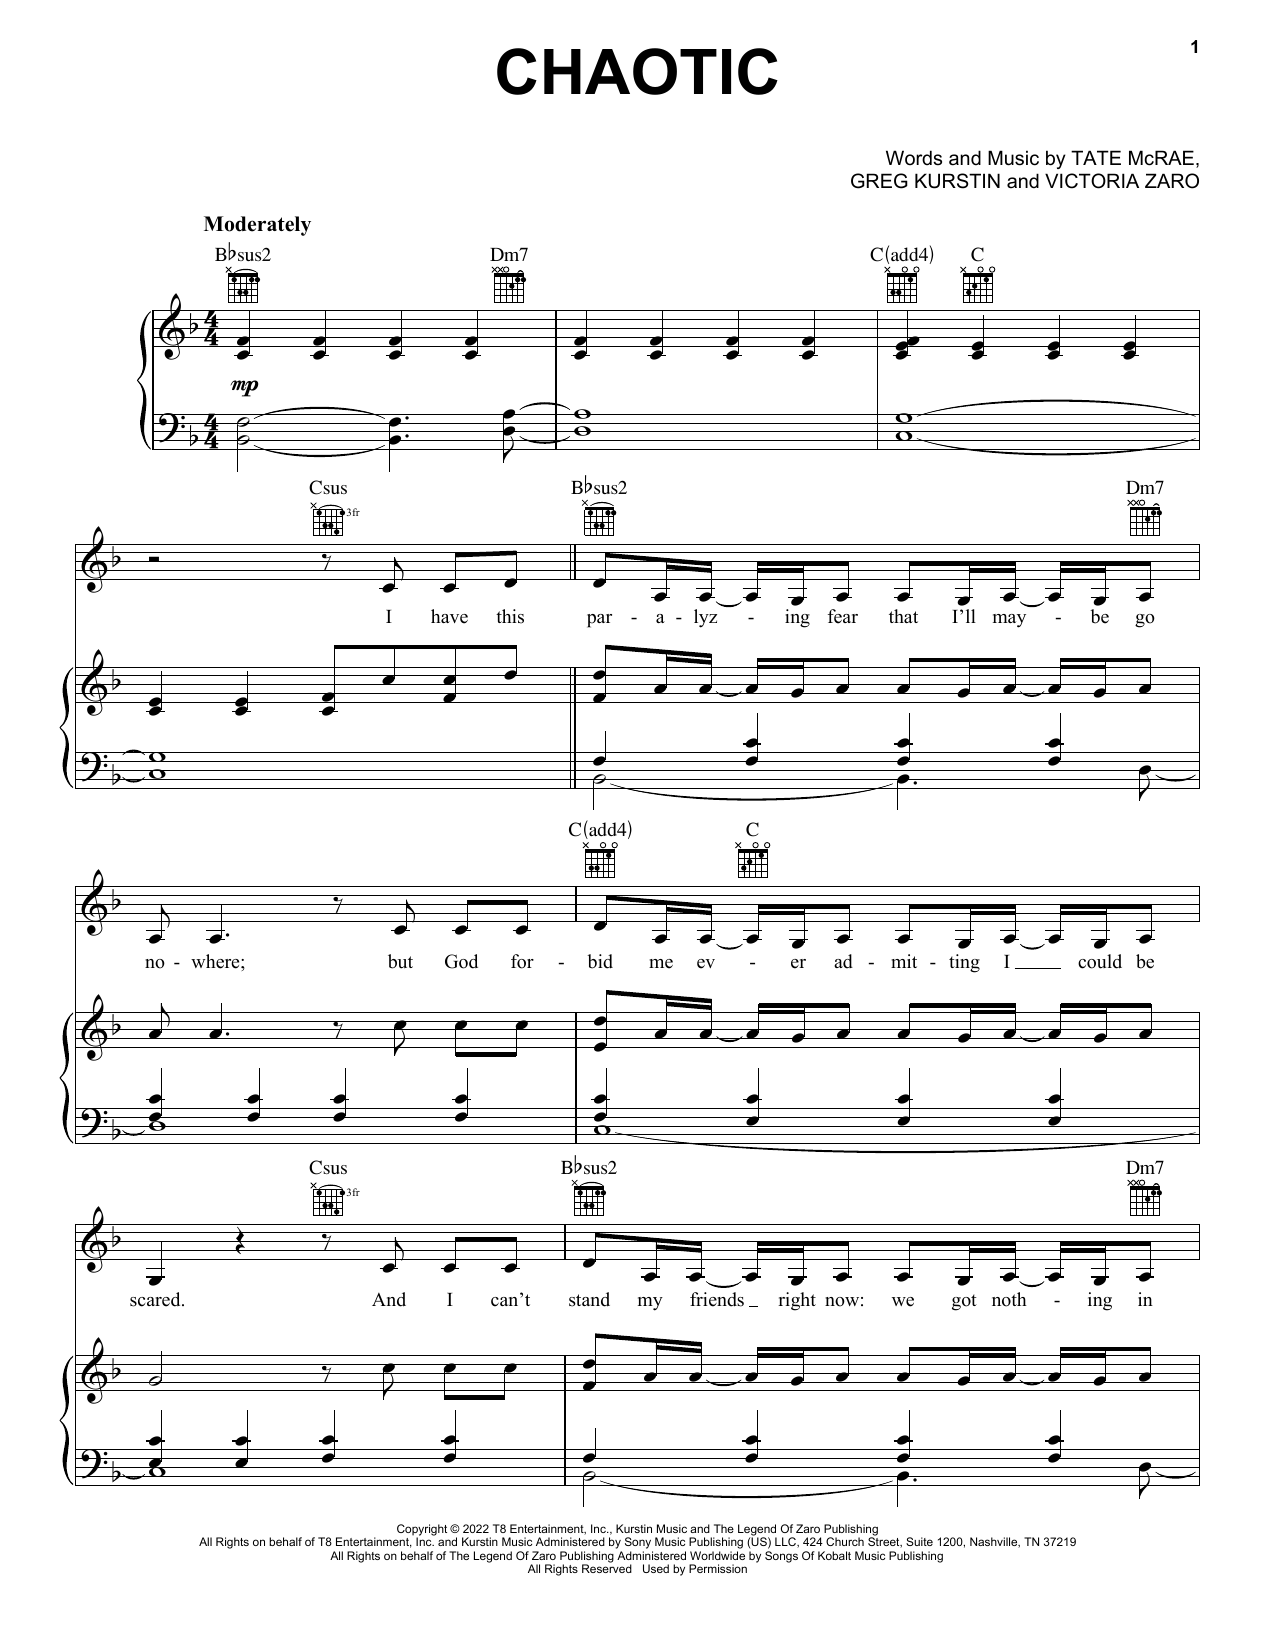 Download Tate McRae Chaotic Sheet Music